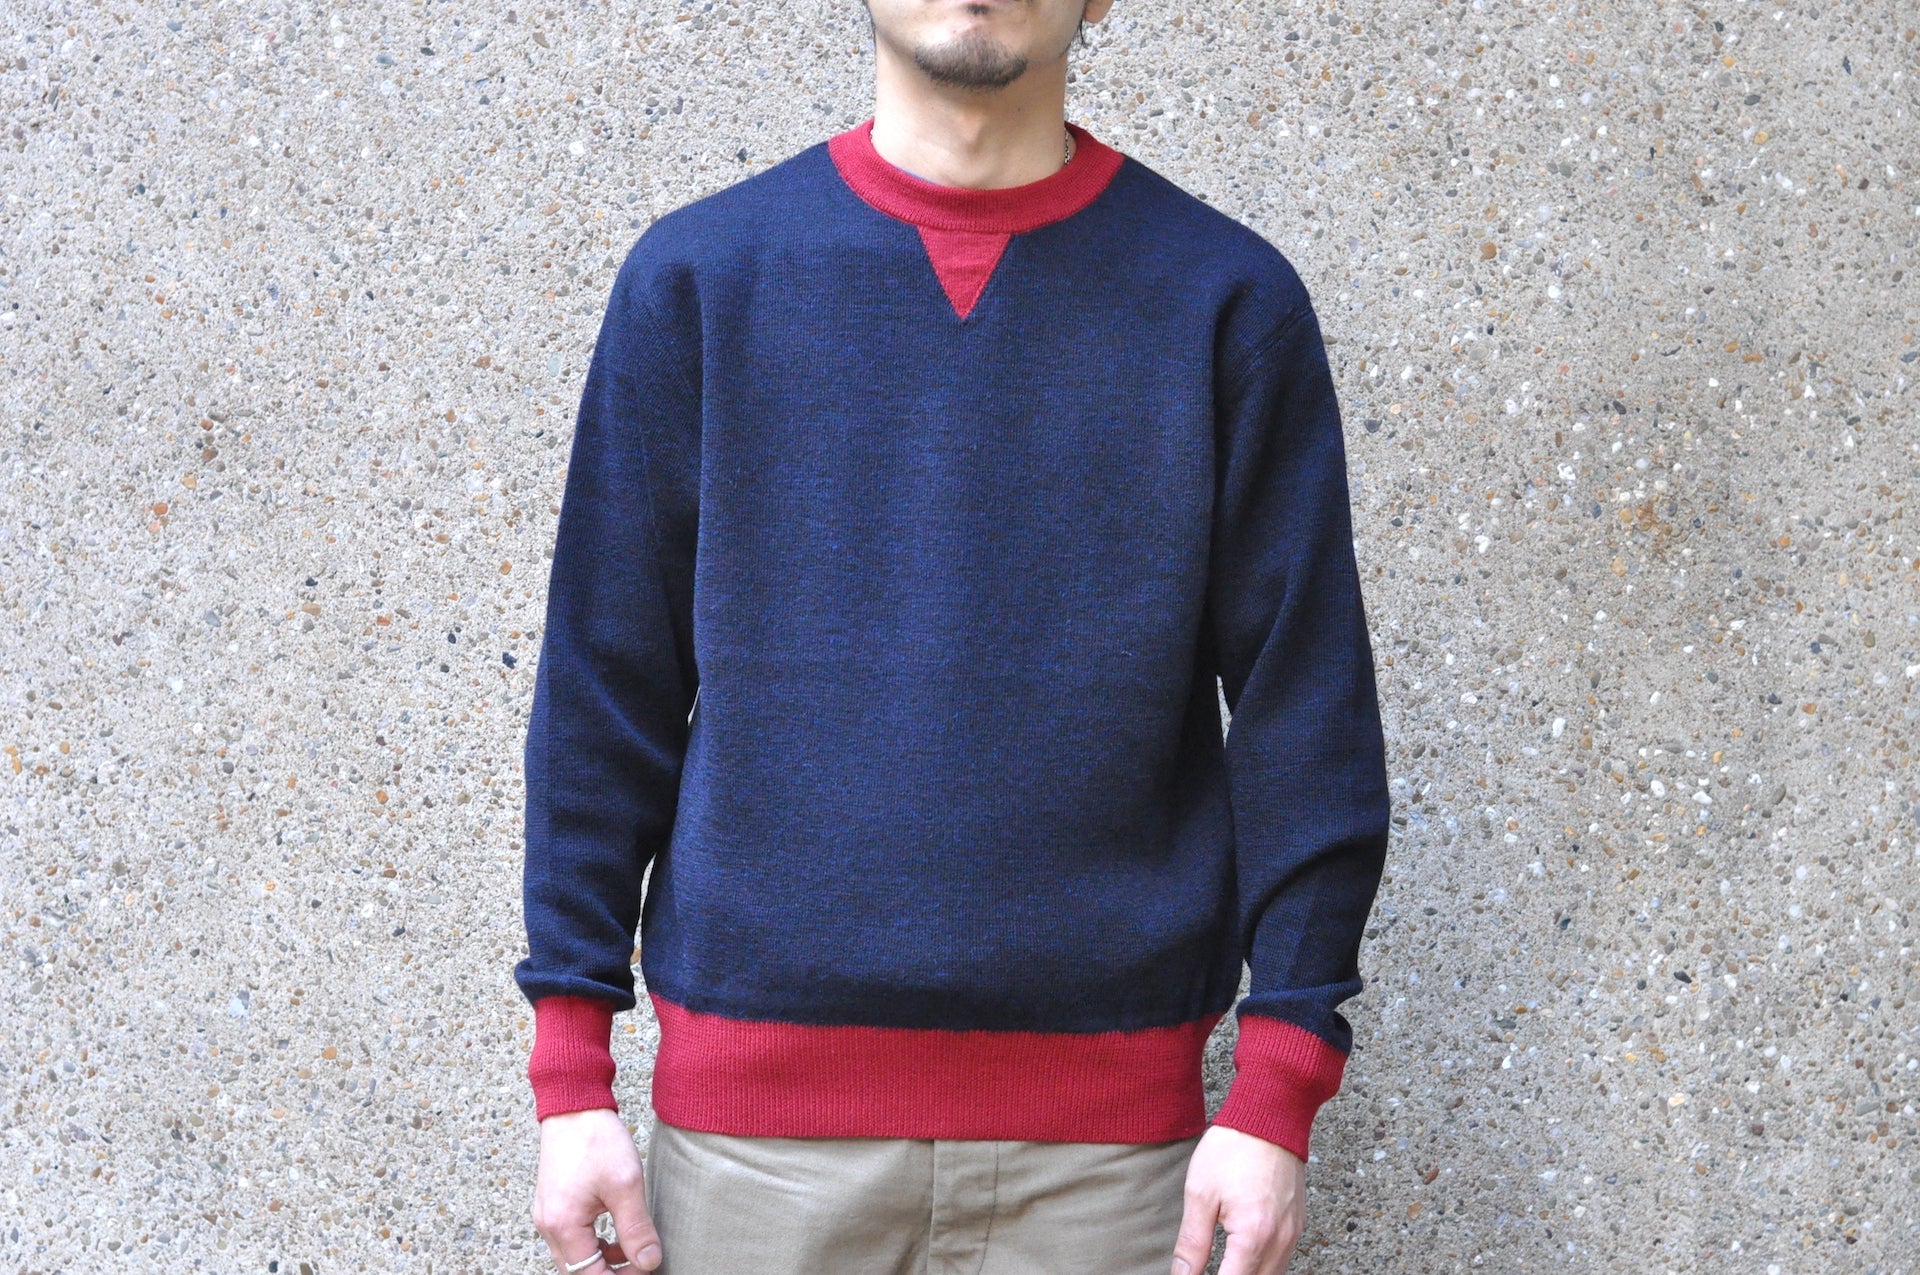 Stevenson Overall Co. Double V Gusset Wool Sweater (Navy X Red)